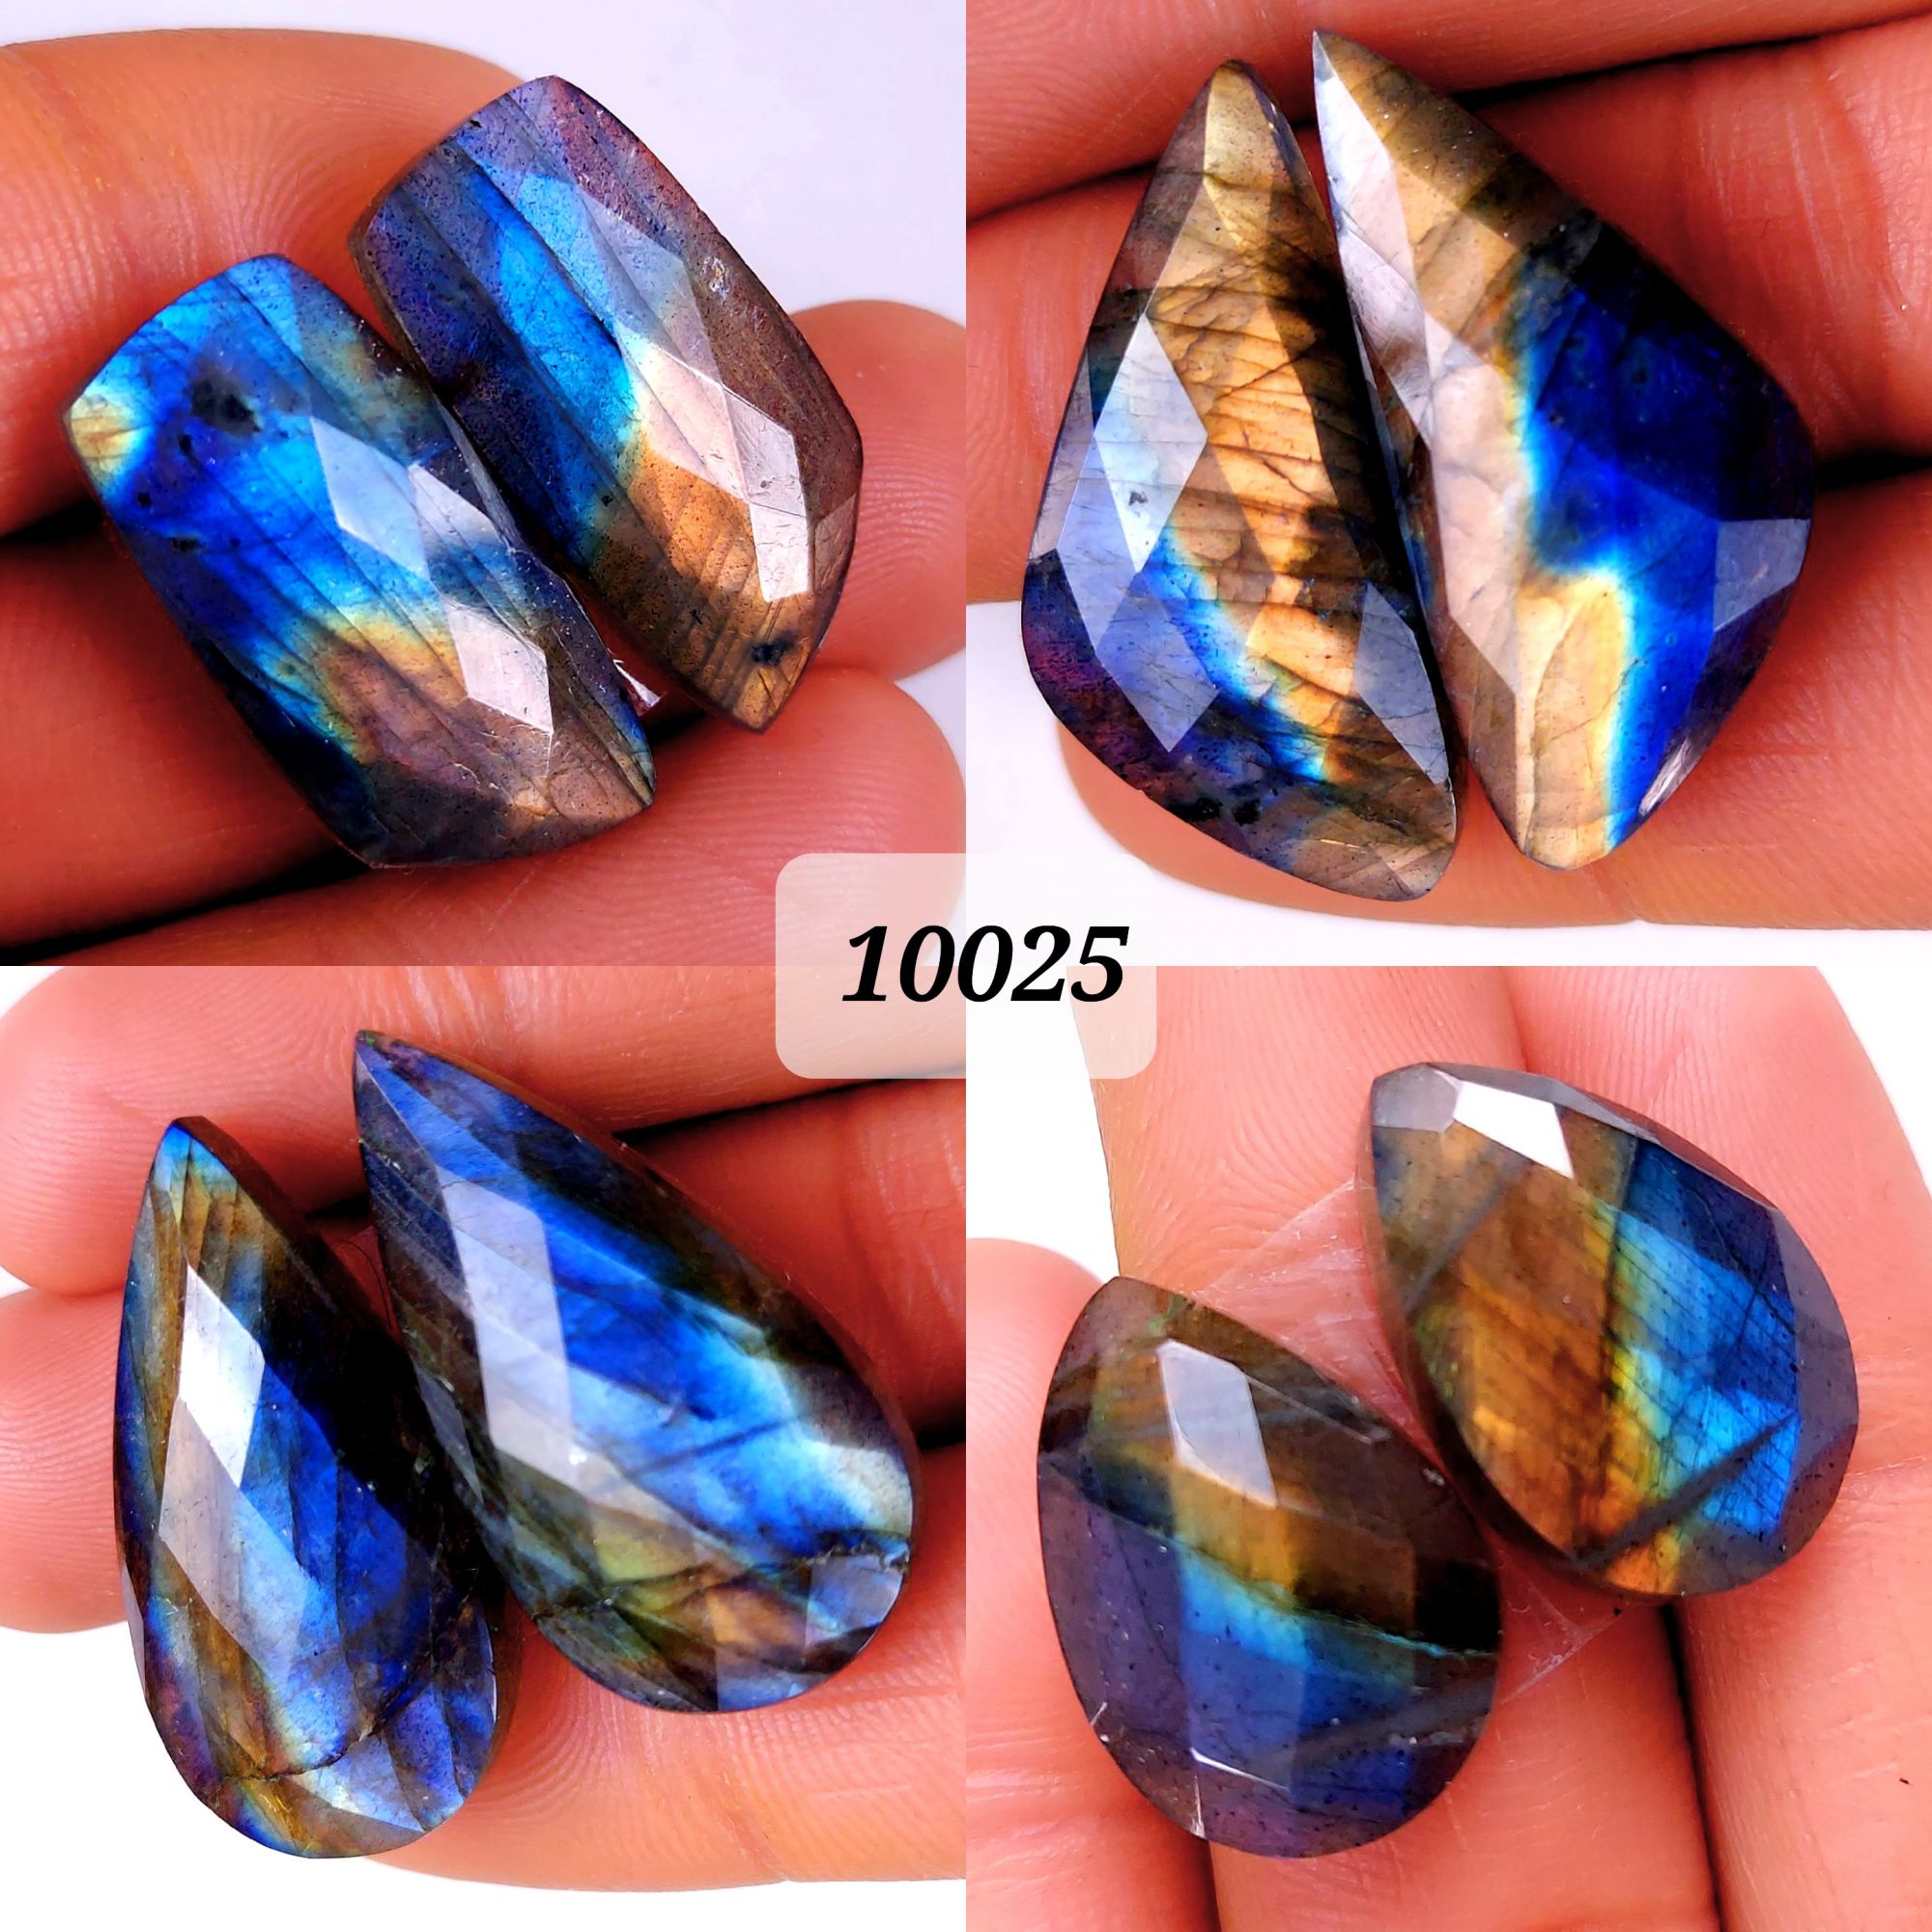 4Pair 150Cts Natural Labradorite Blue Fire Faceted Dangle Drop Earrings Semi Precious Crystal For Hoop Earrings Blue Gemstone Cabochon Matching pair 30x16 20x14mm #10025